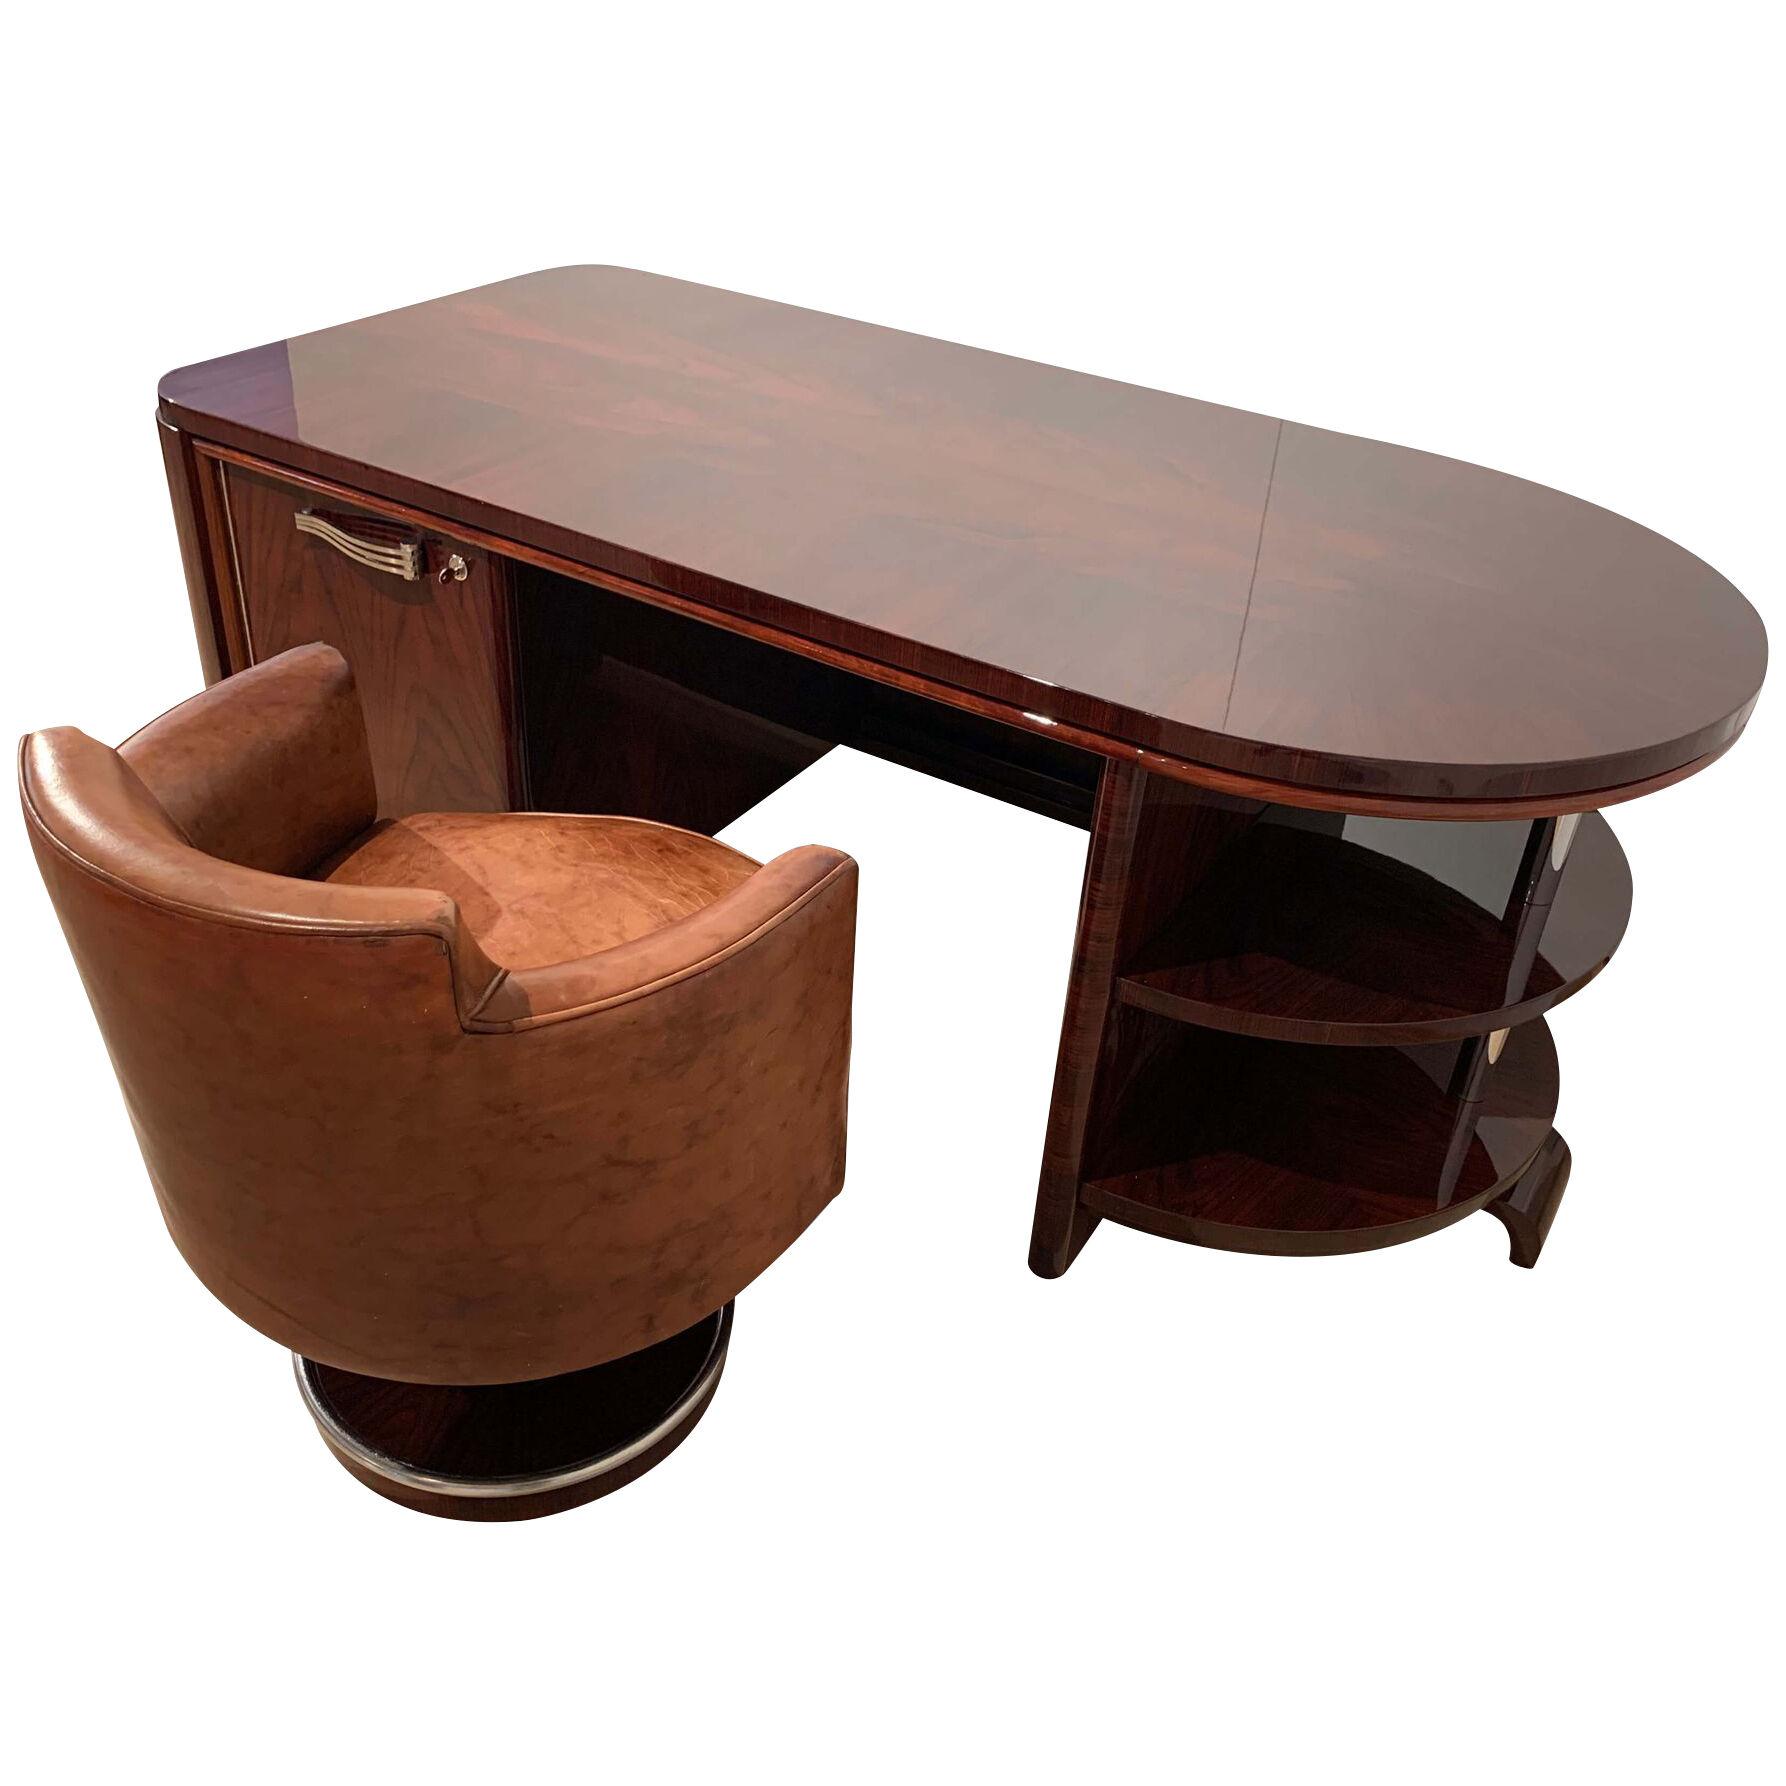 Art Deco Executive Desk and Leather Swivel Chair, Rosewood Veneer, France, 1930s